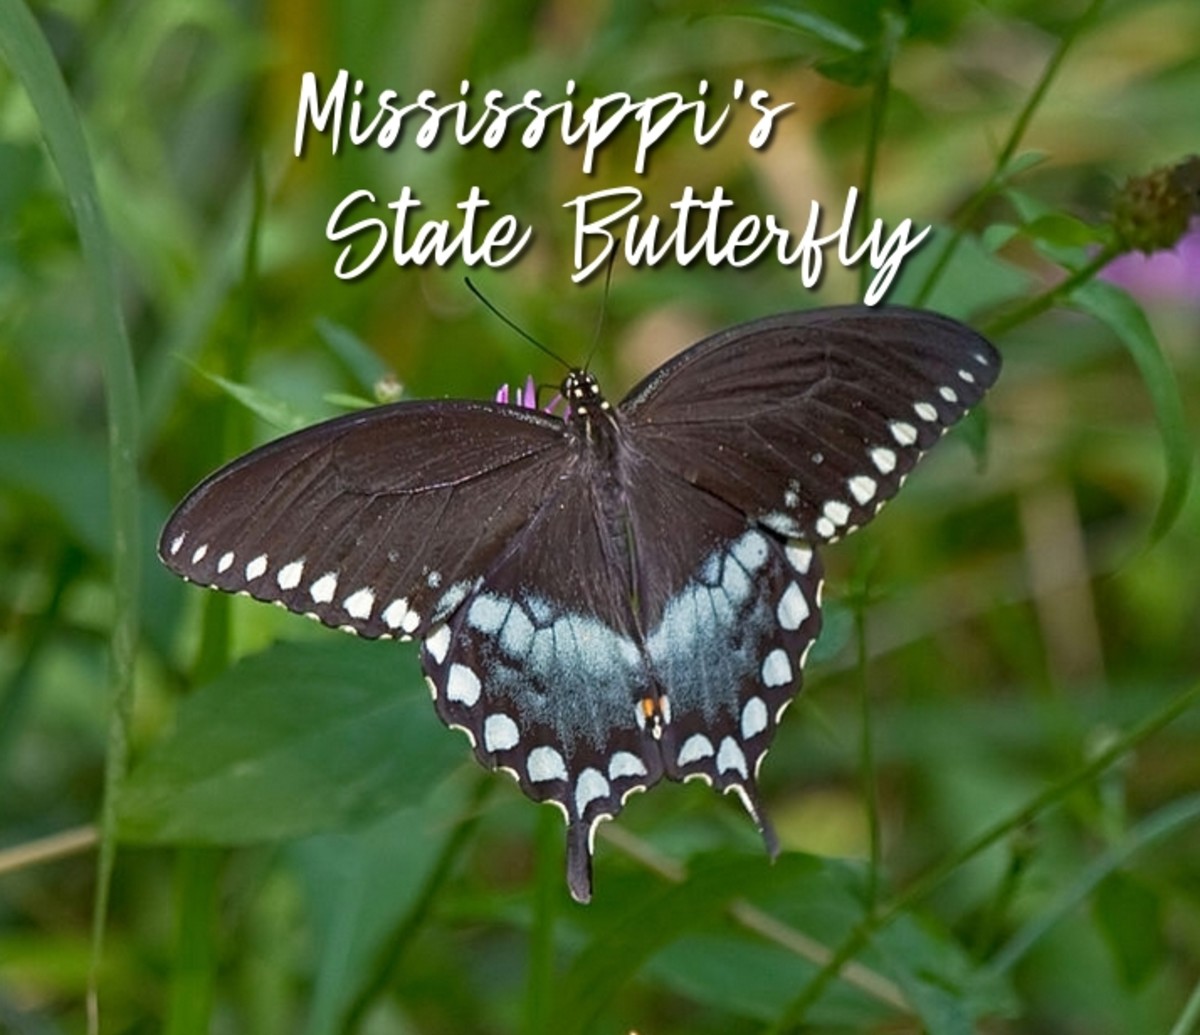 Mississippi's State Butterfly